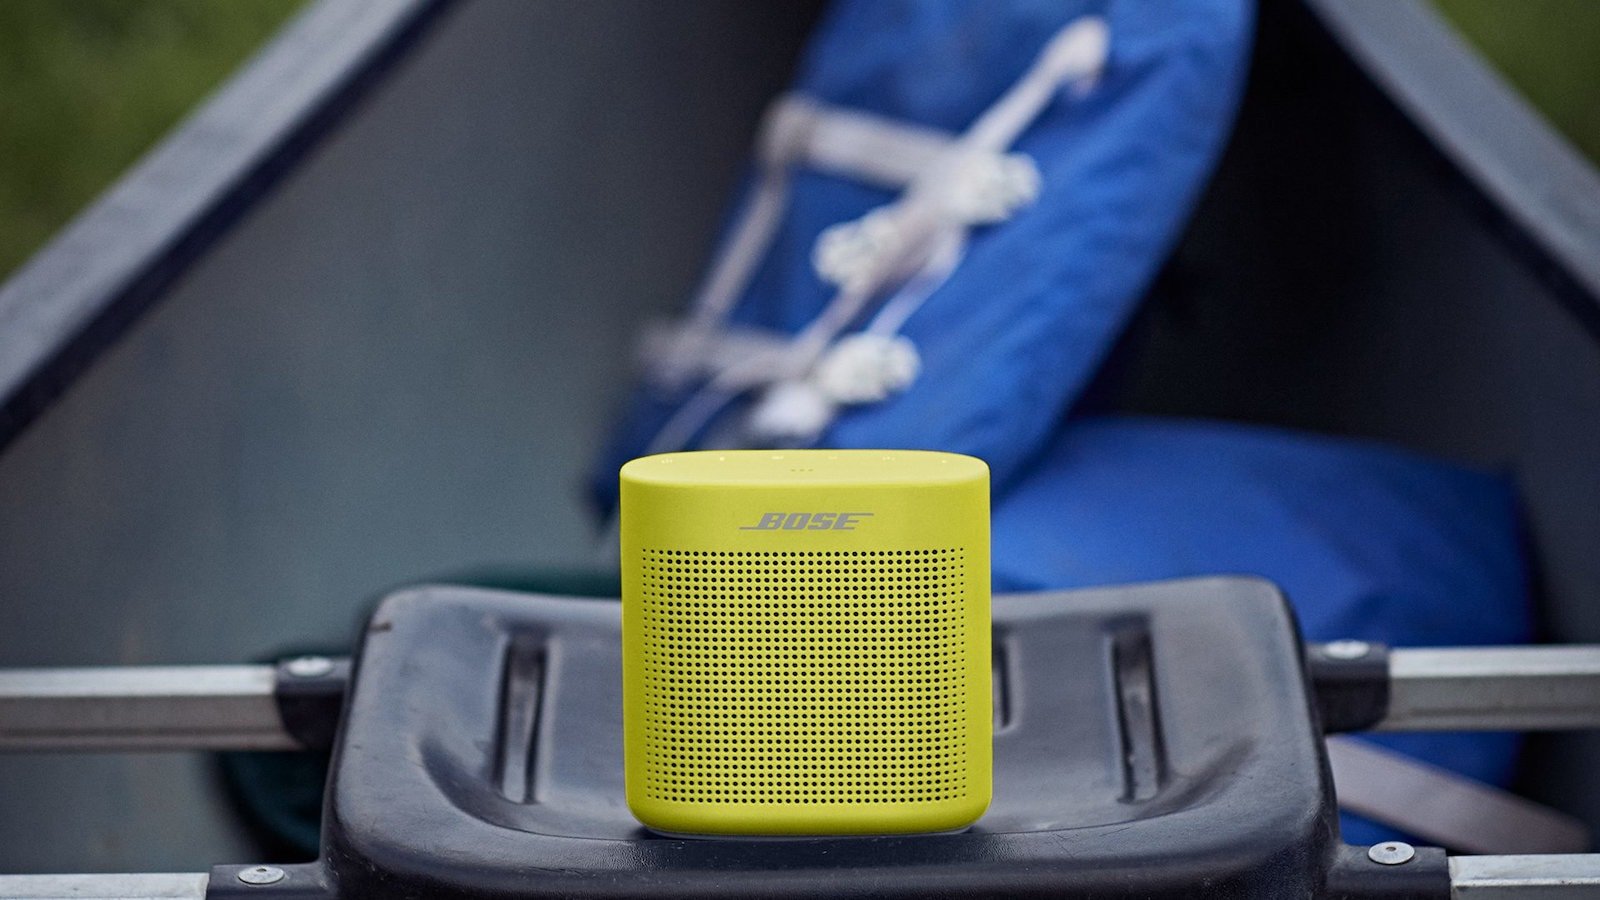 Bose SoundLink Color Bluetooth speaker II comes in an array of super fun, vibrant colors